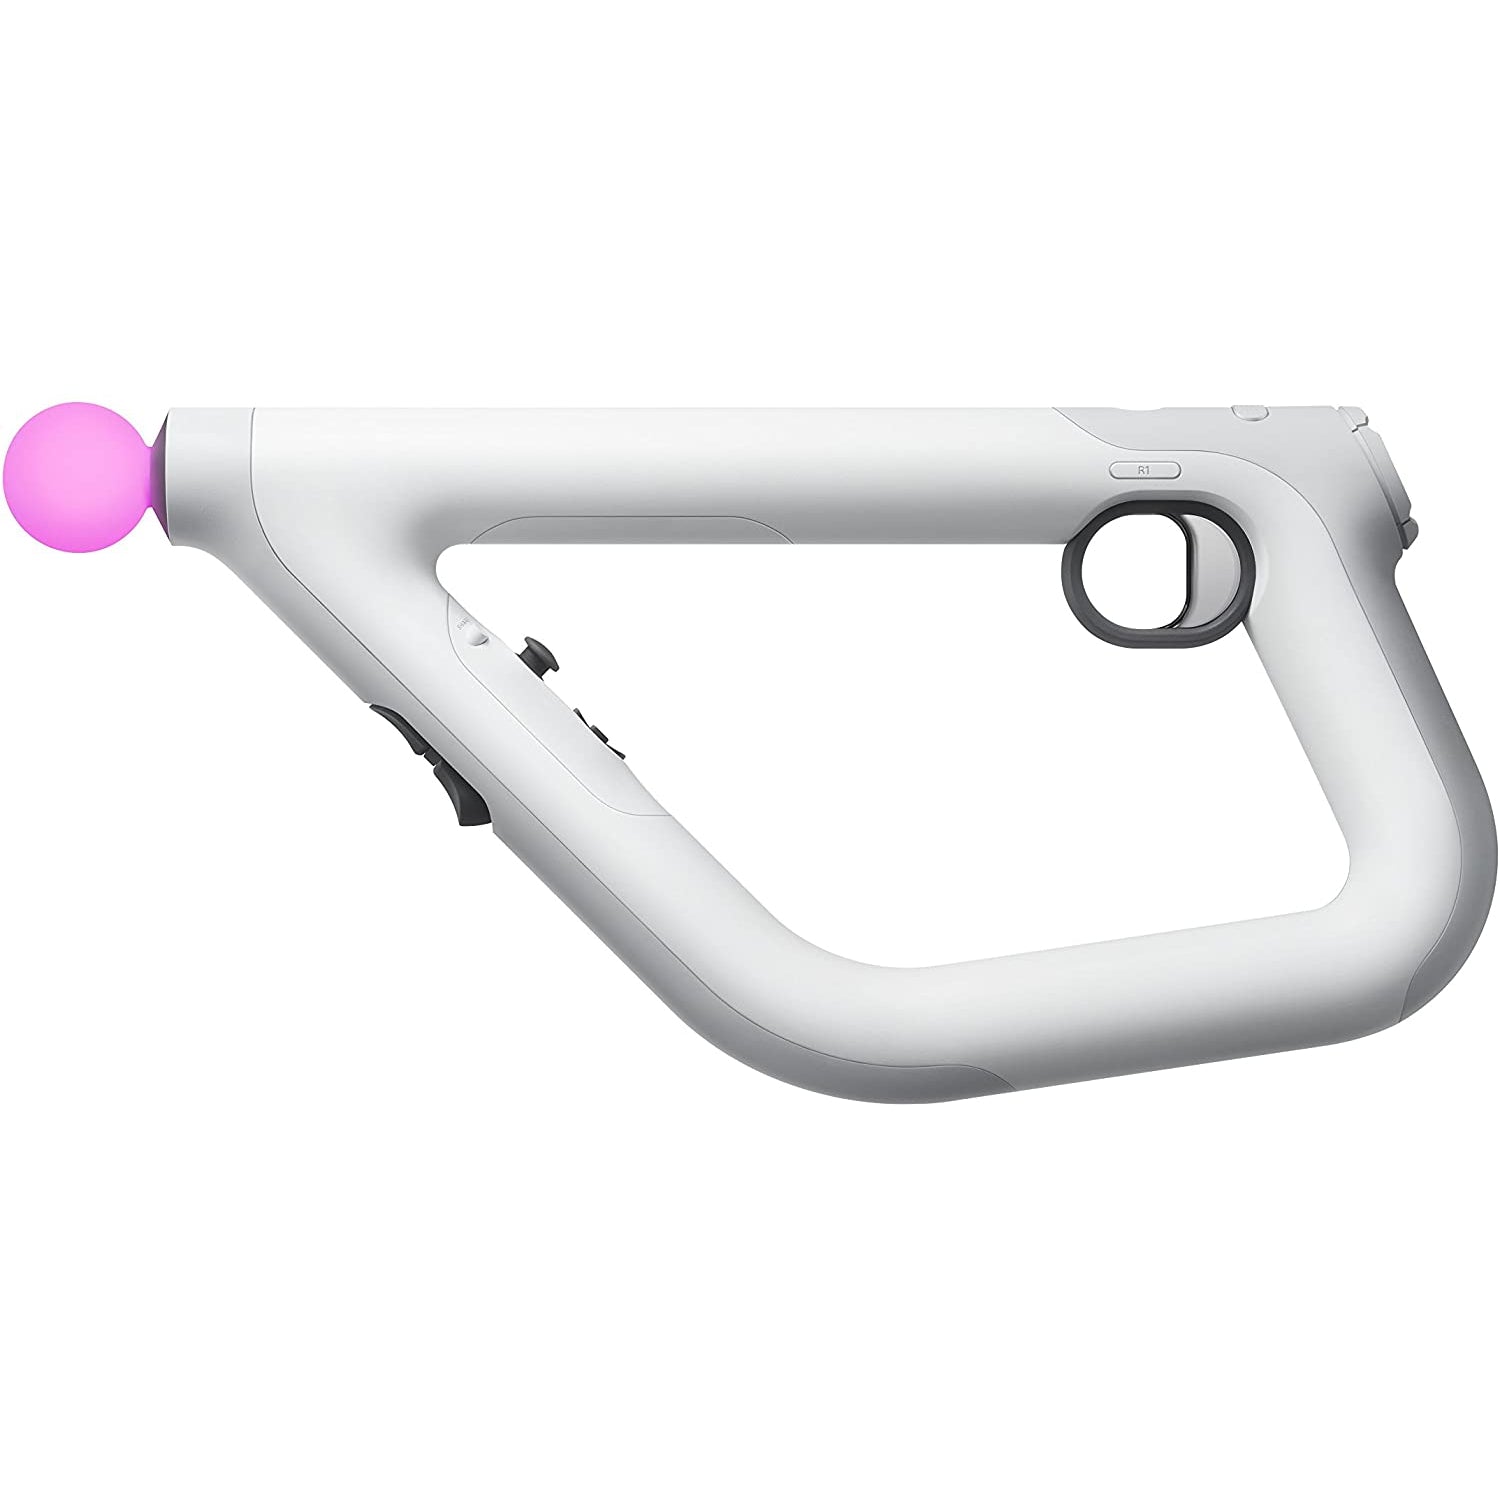 PlayStation VR Aim Controller (PS4) - White